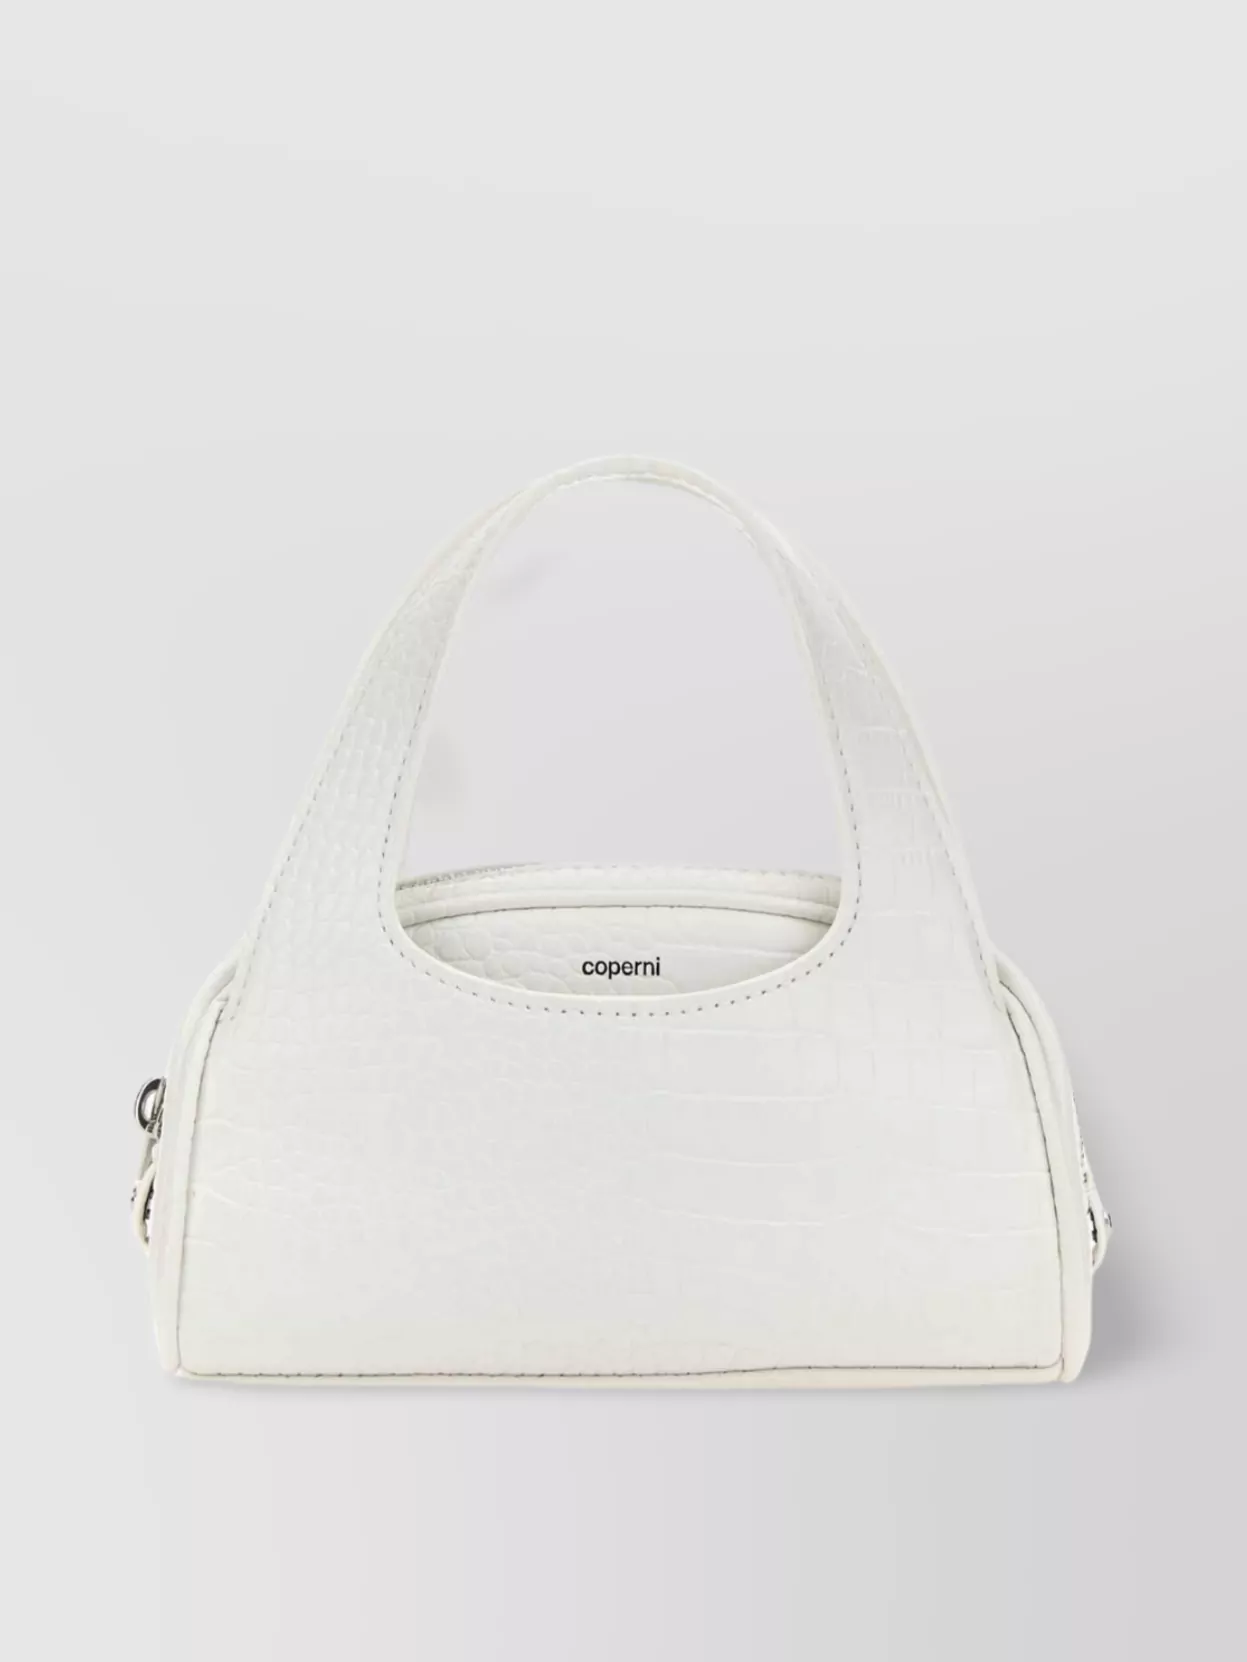 Coperni Small Faux Leather Top Handle Bag In 白色